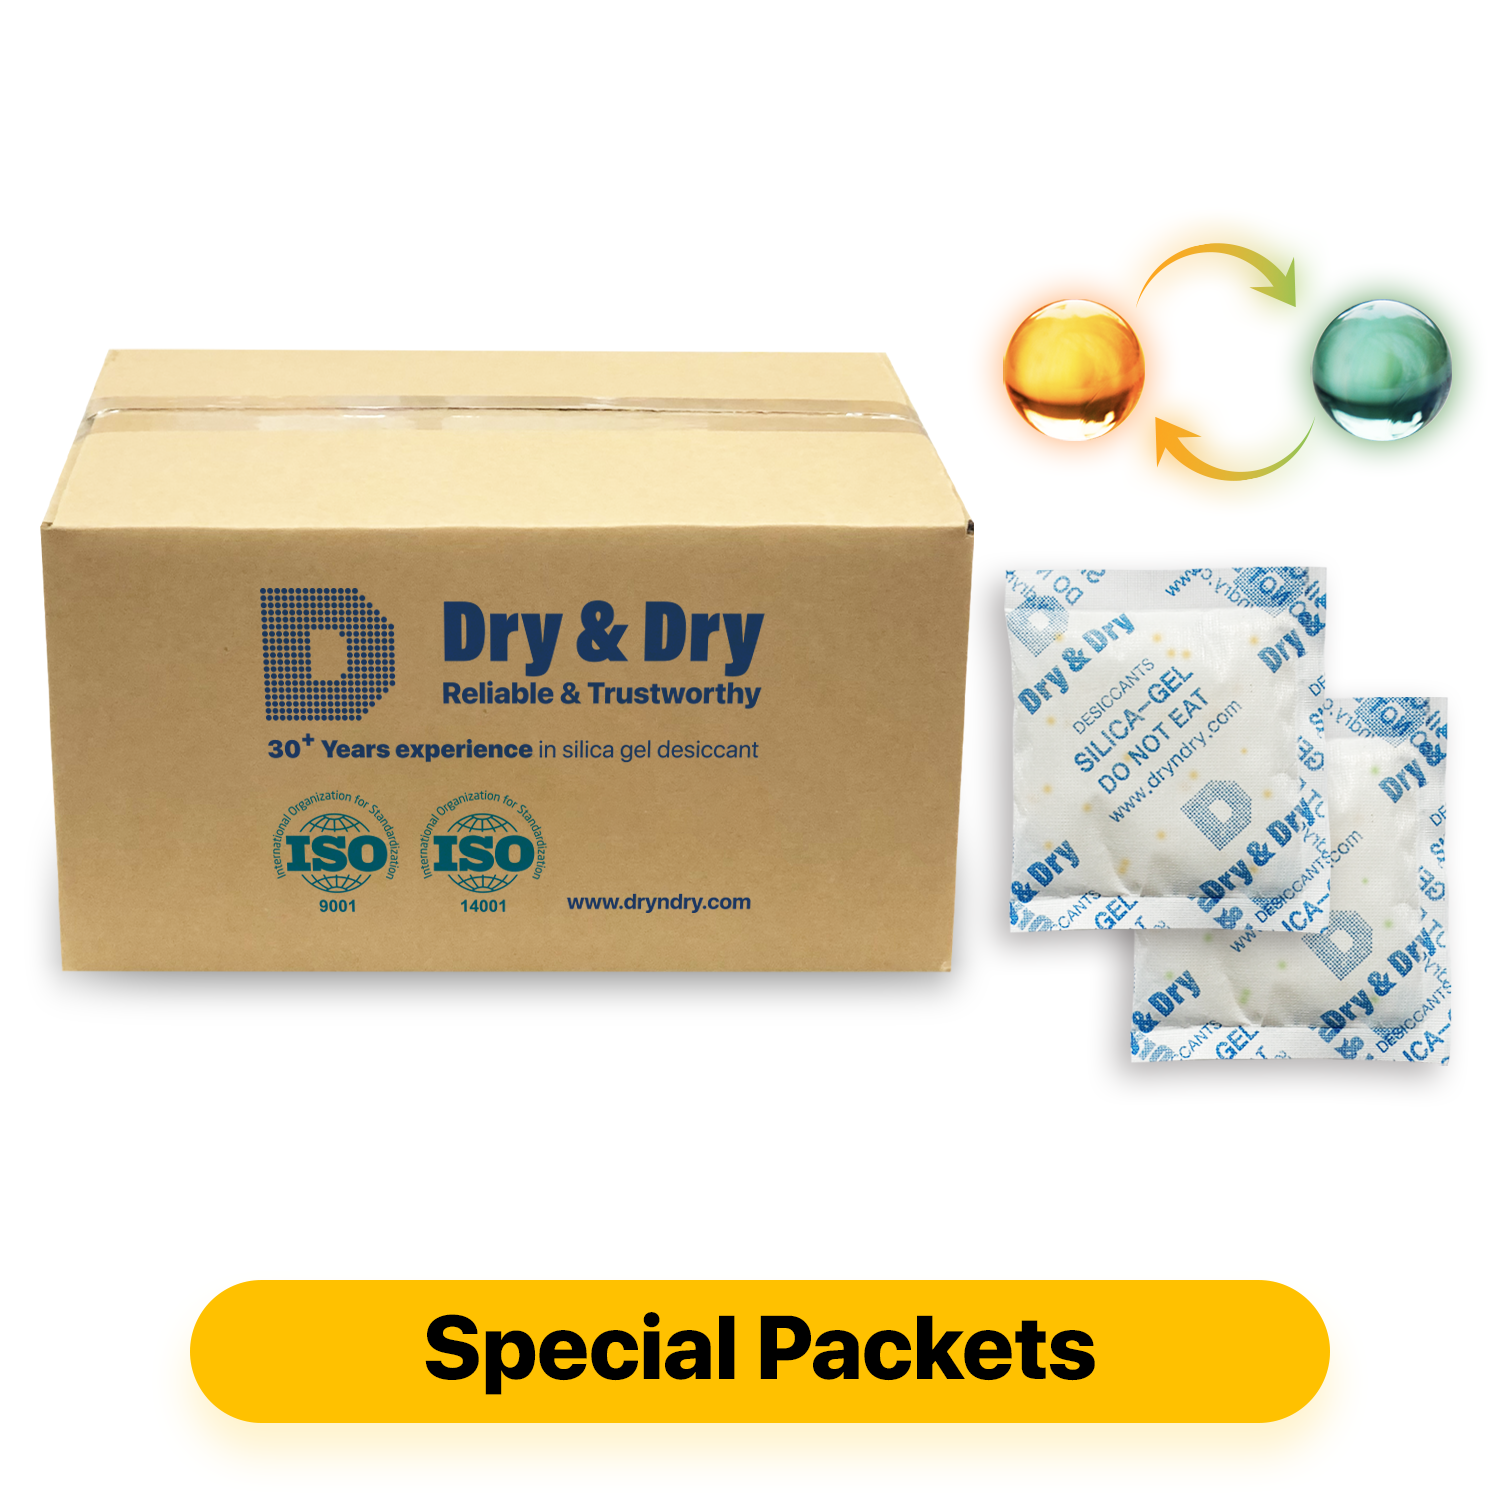 50 Gram [400 Packs] "Dry & Dry" SPECIAL Food Safe Orange Indicating(Orange to Dark Green) Mixed Silica Gel Packets - Rechargeable(FDA Compliant)